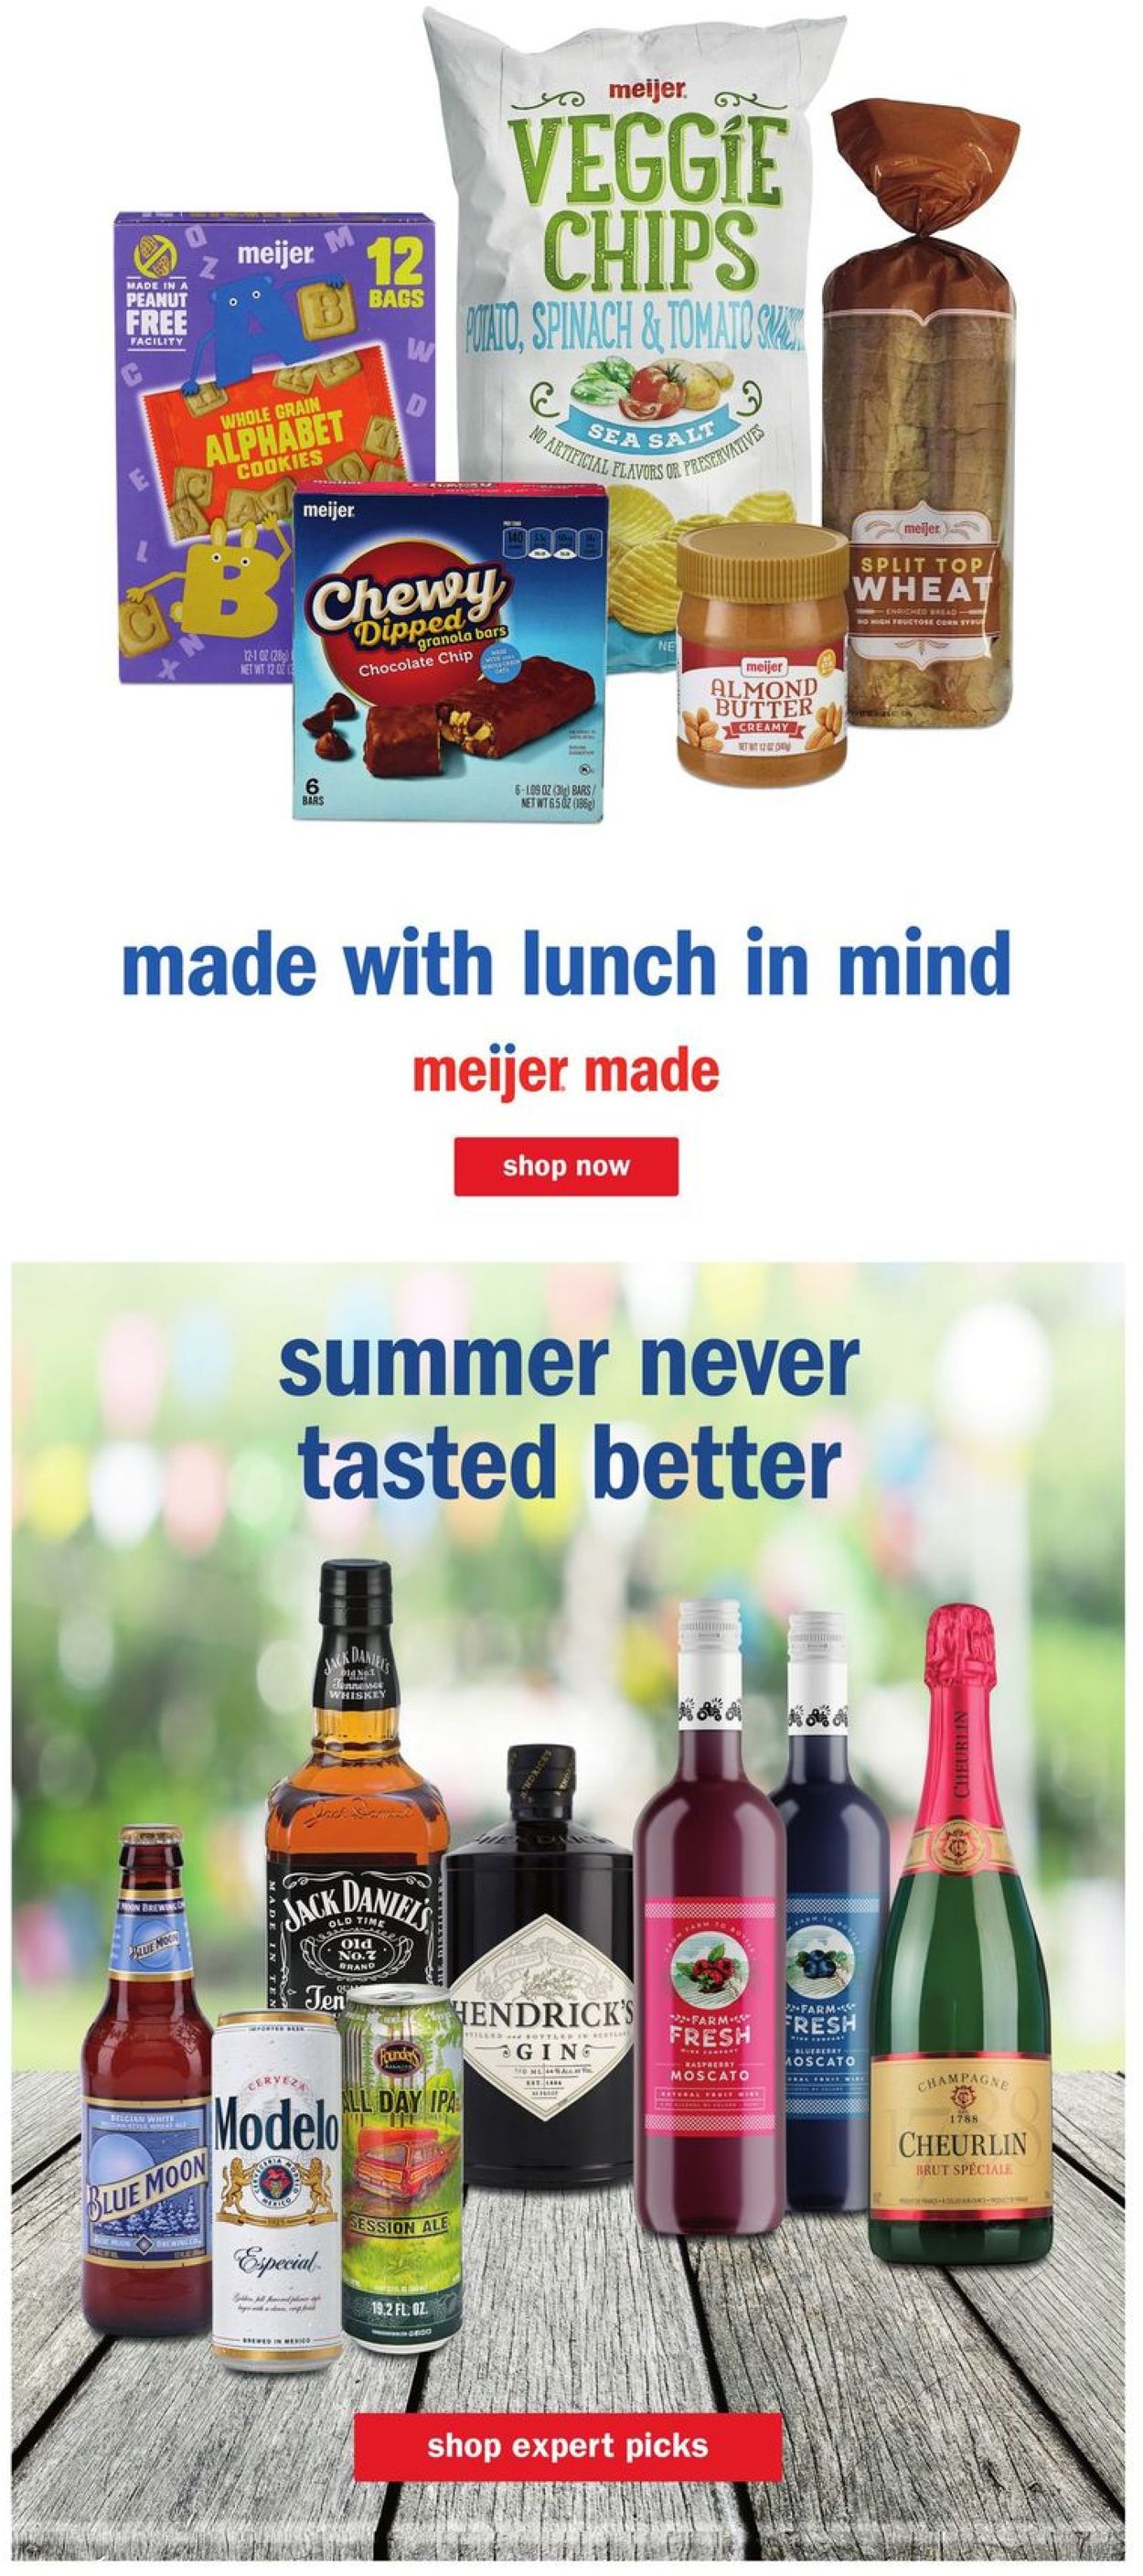 Catalogue Meijer from 08/16/2020